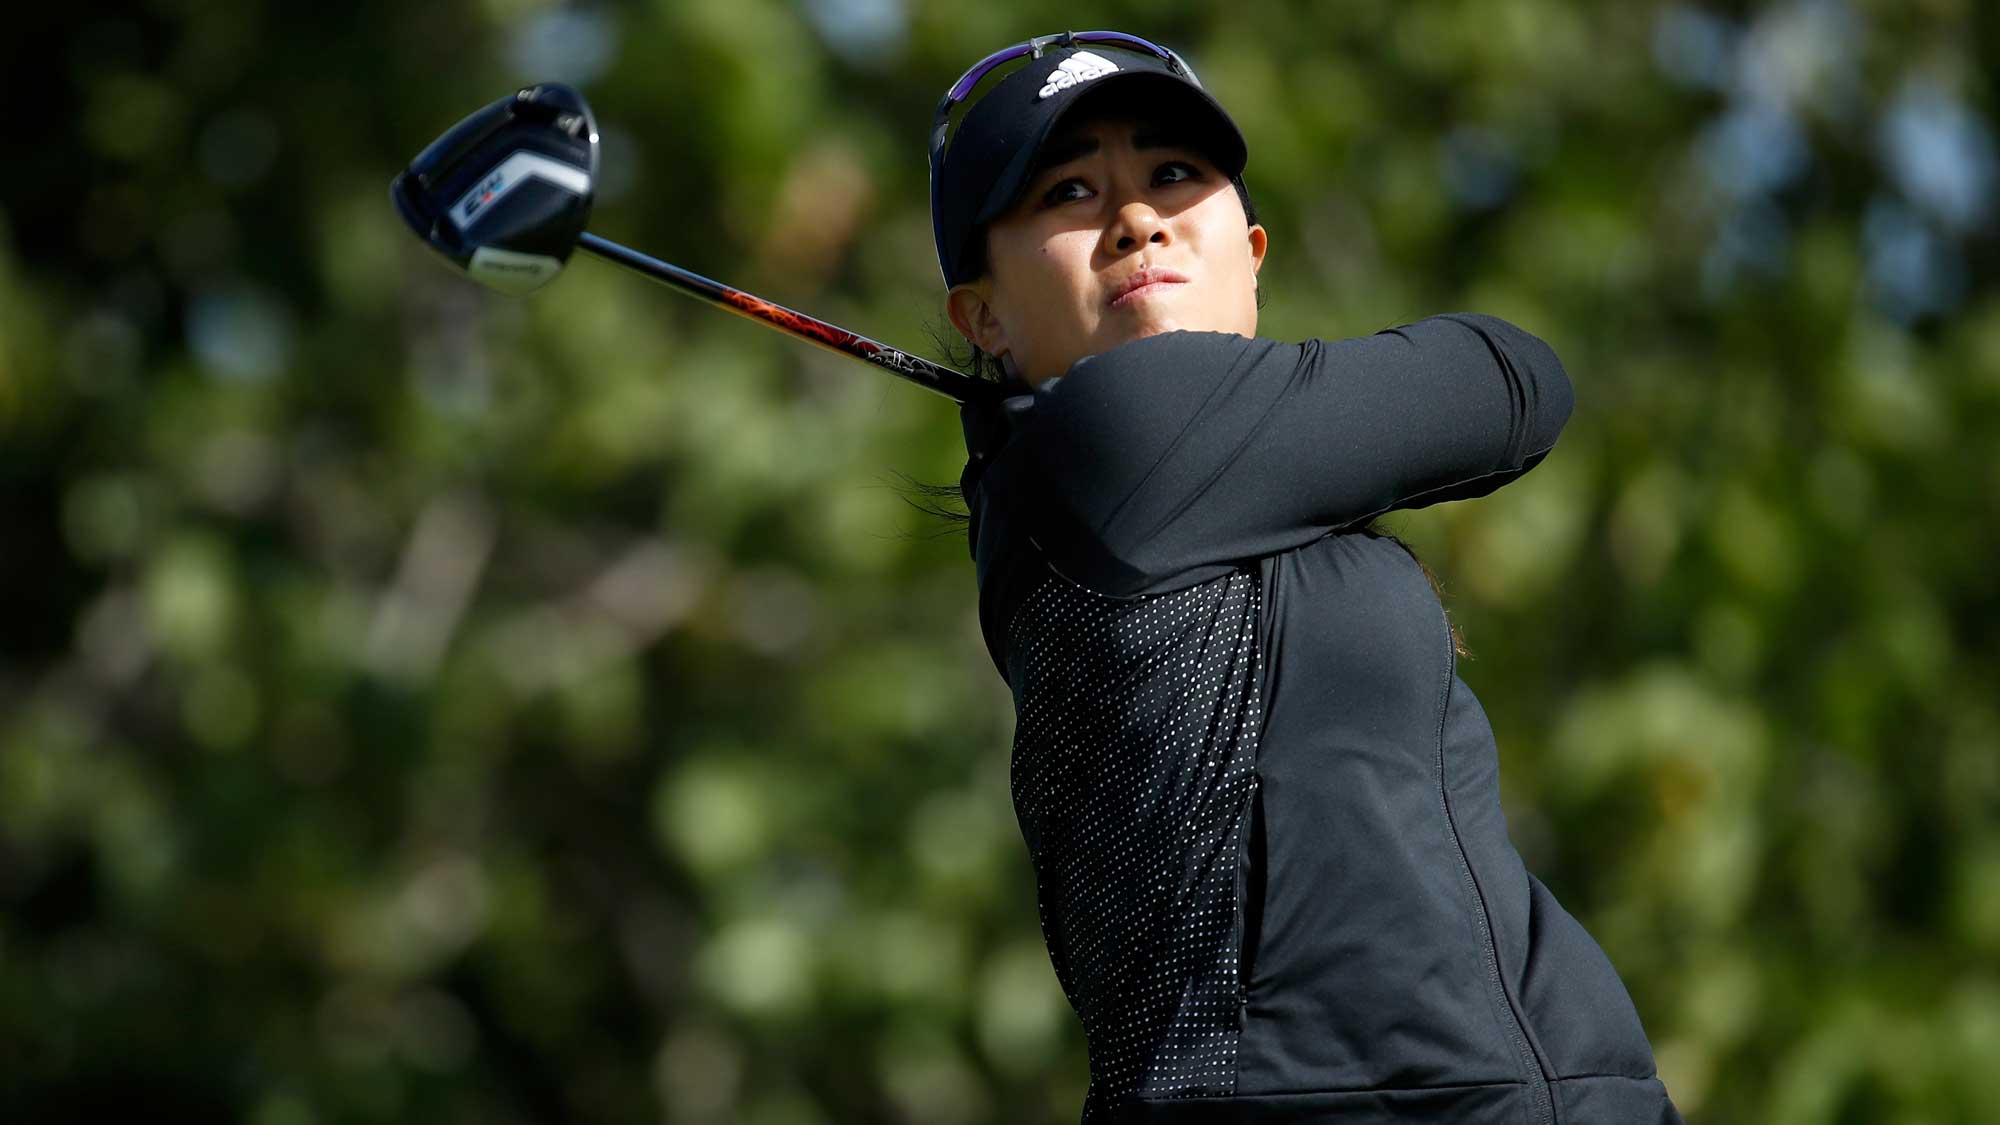 Danielle Kang hits her tee shot on the fourth hole during the second round of the Pure Silk Bahamas LPGA Classic